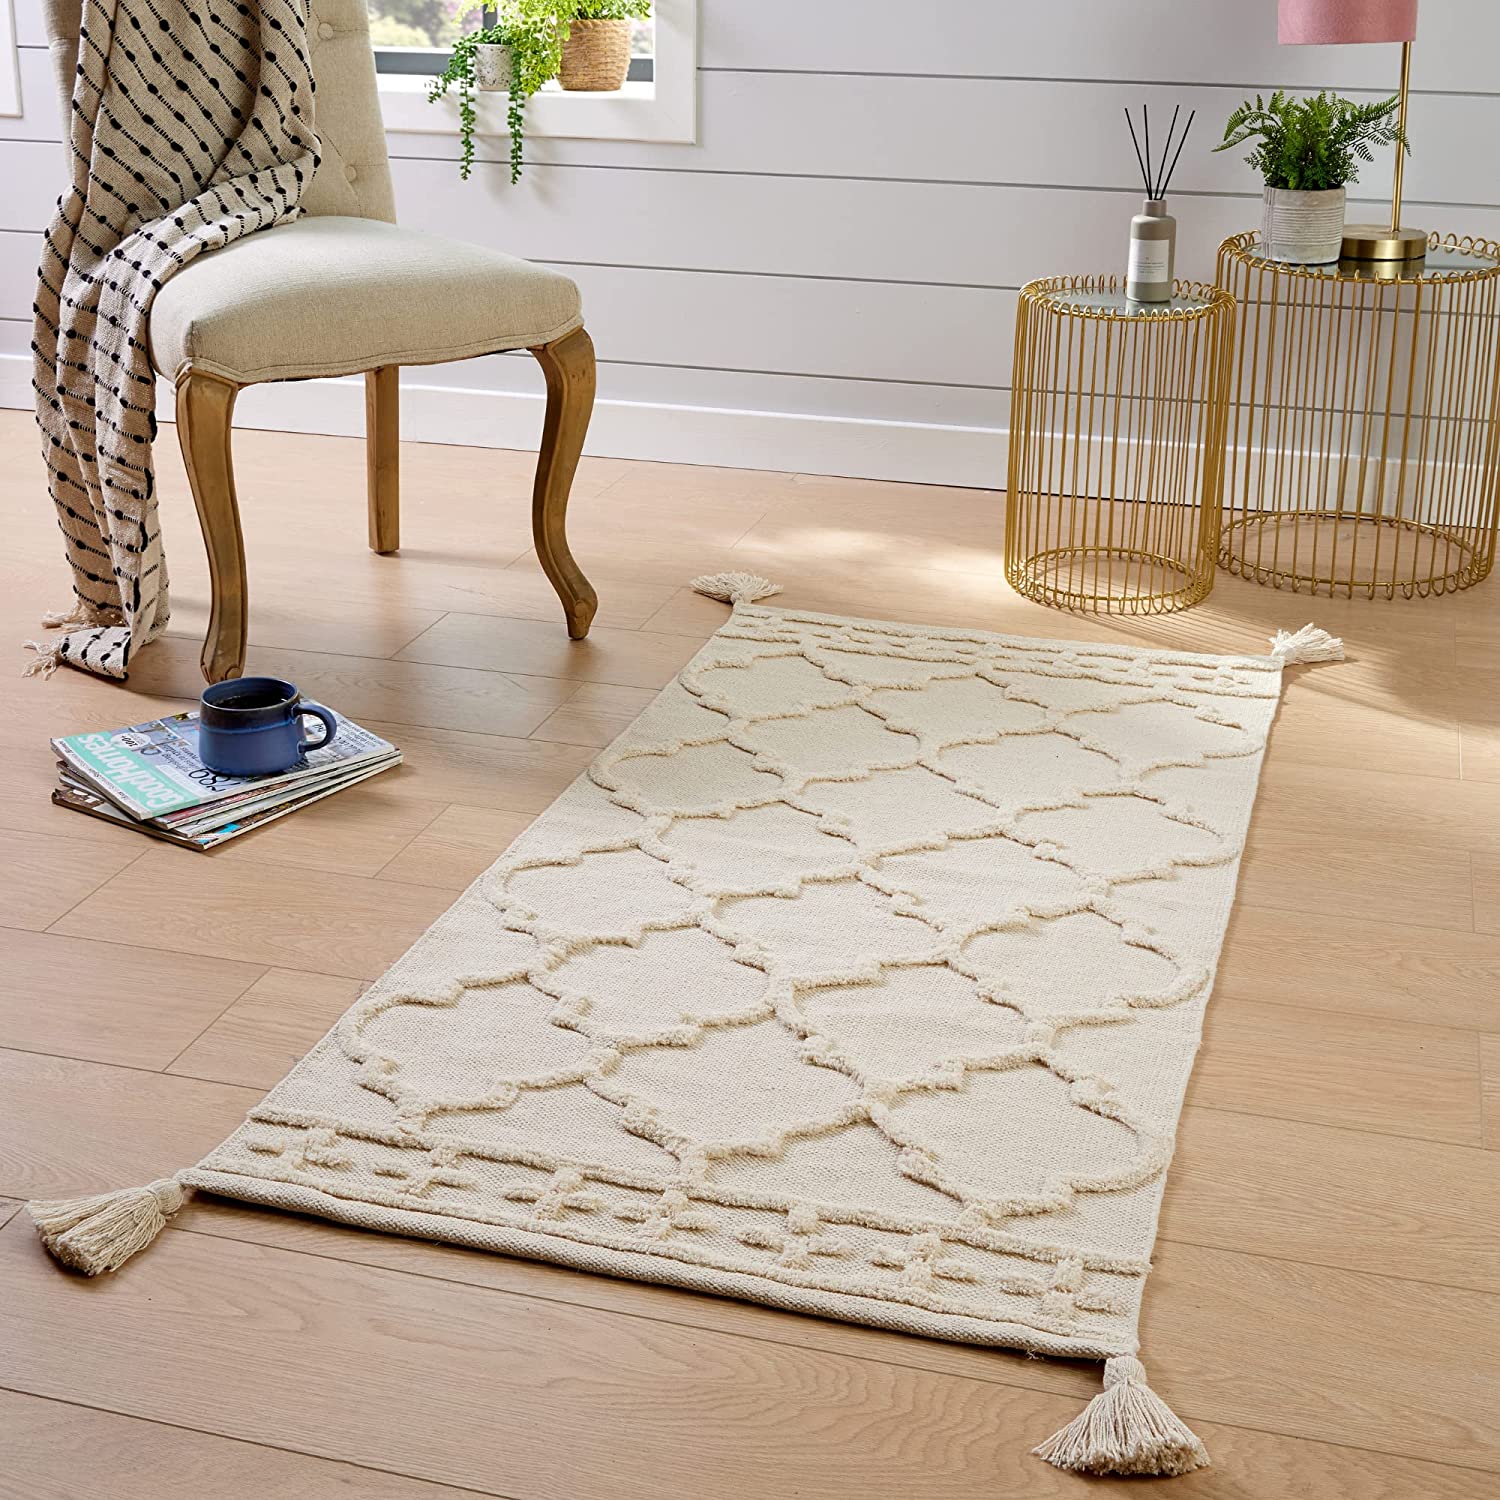 Marrakesh Rugs Living Room Hand Woven Tufted